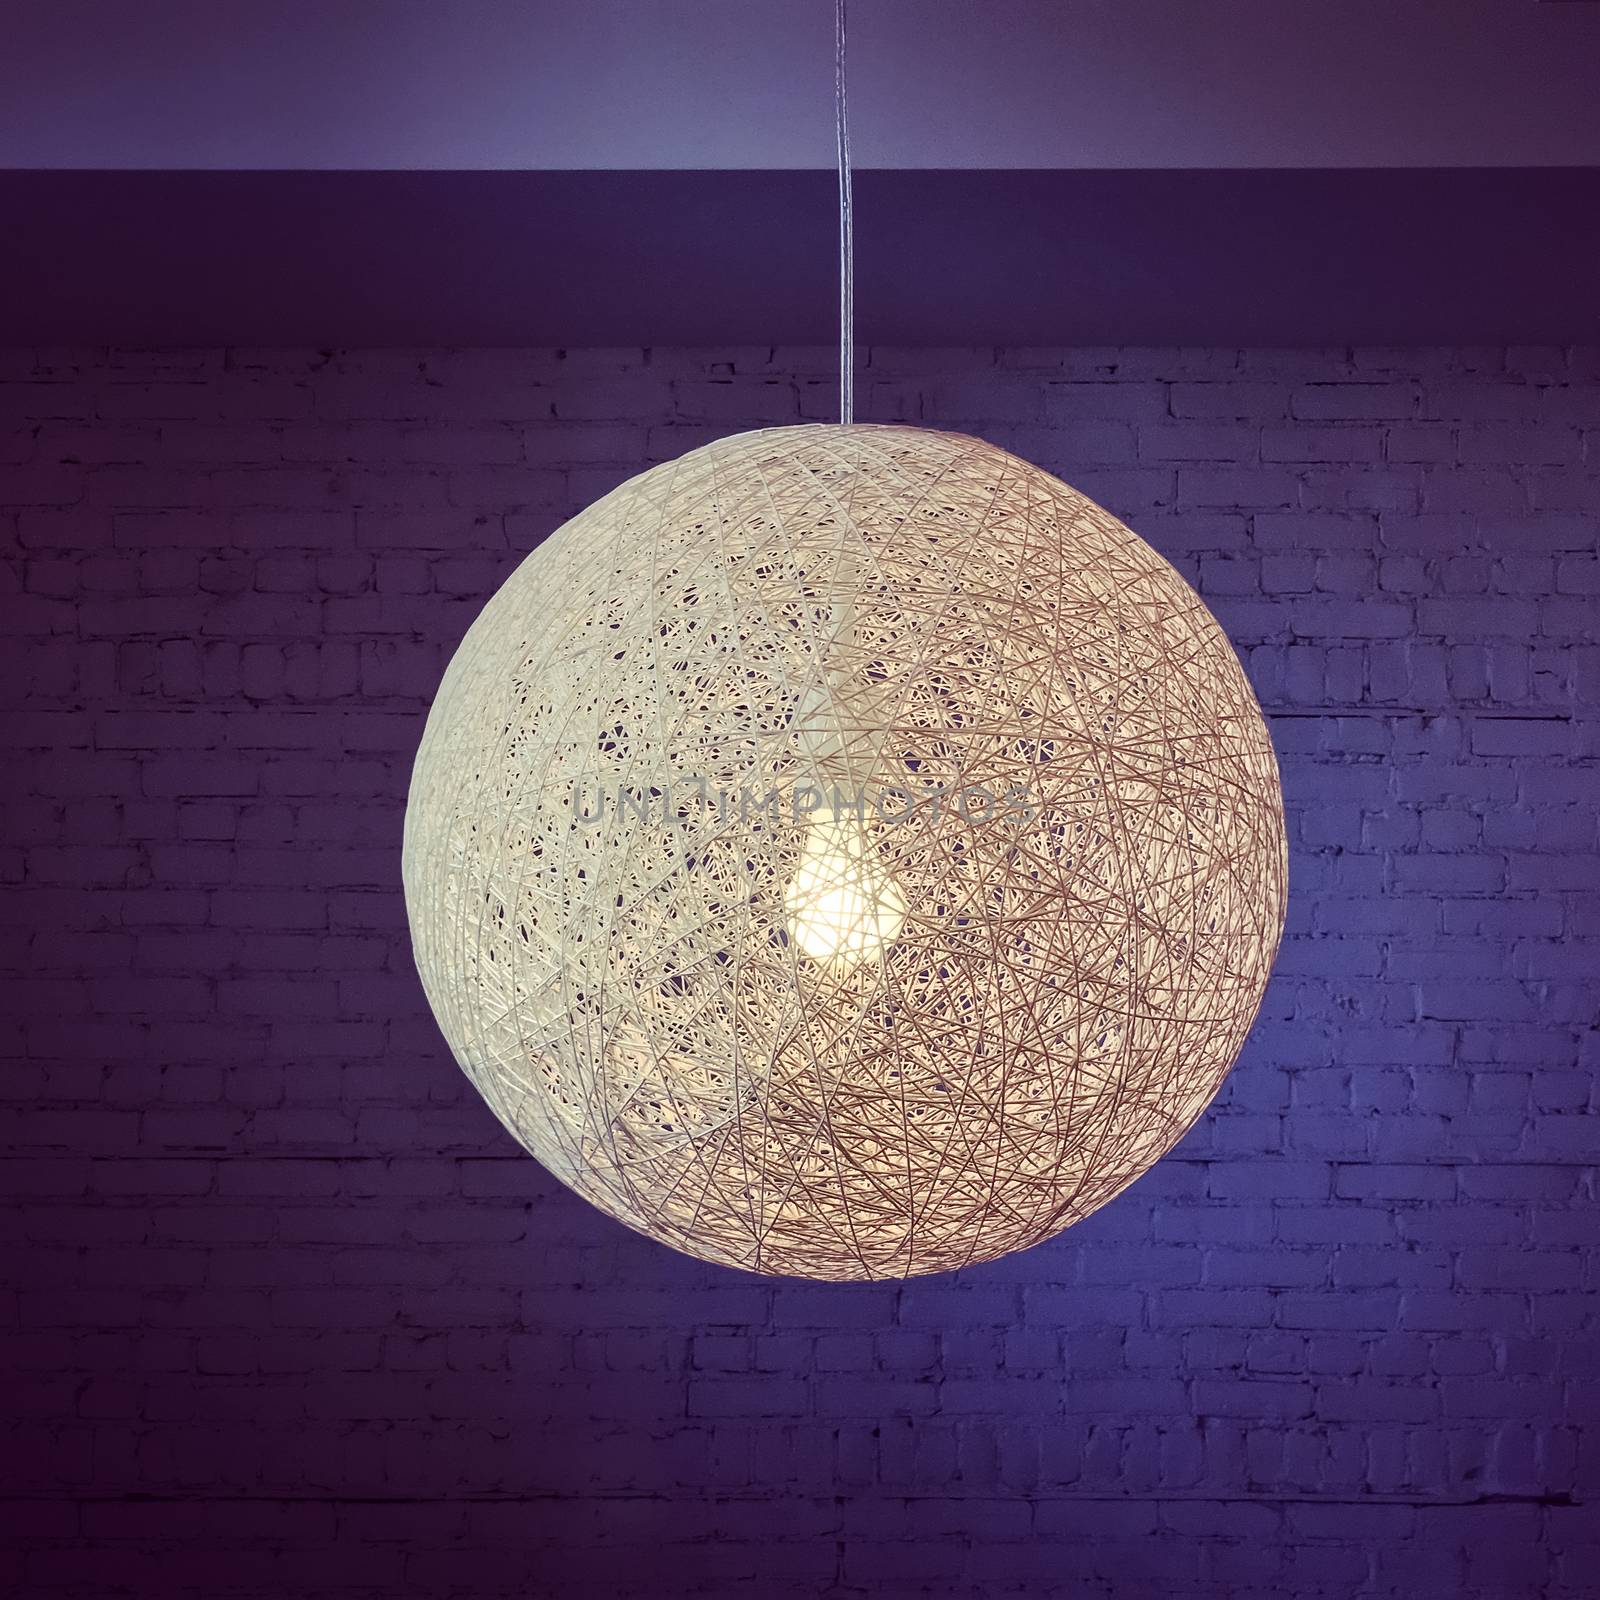 Pendant lamp with round lampshade in purple tones by anikasalsera